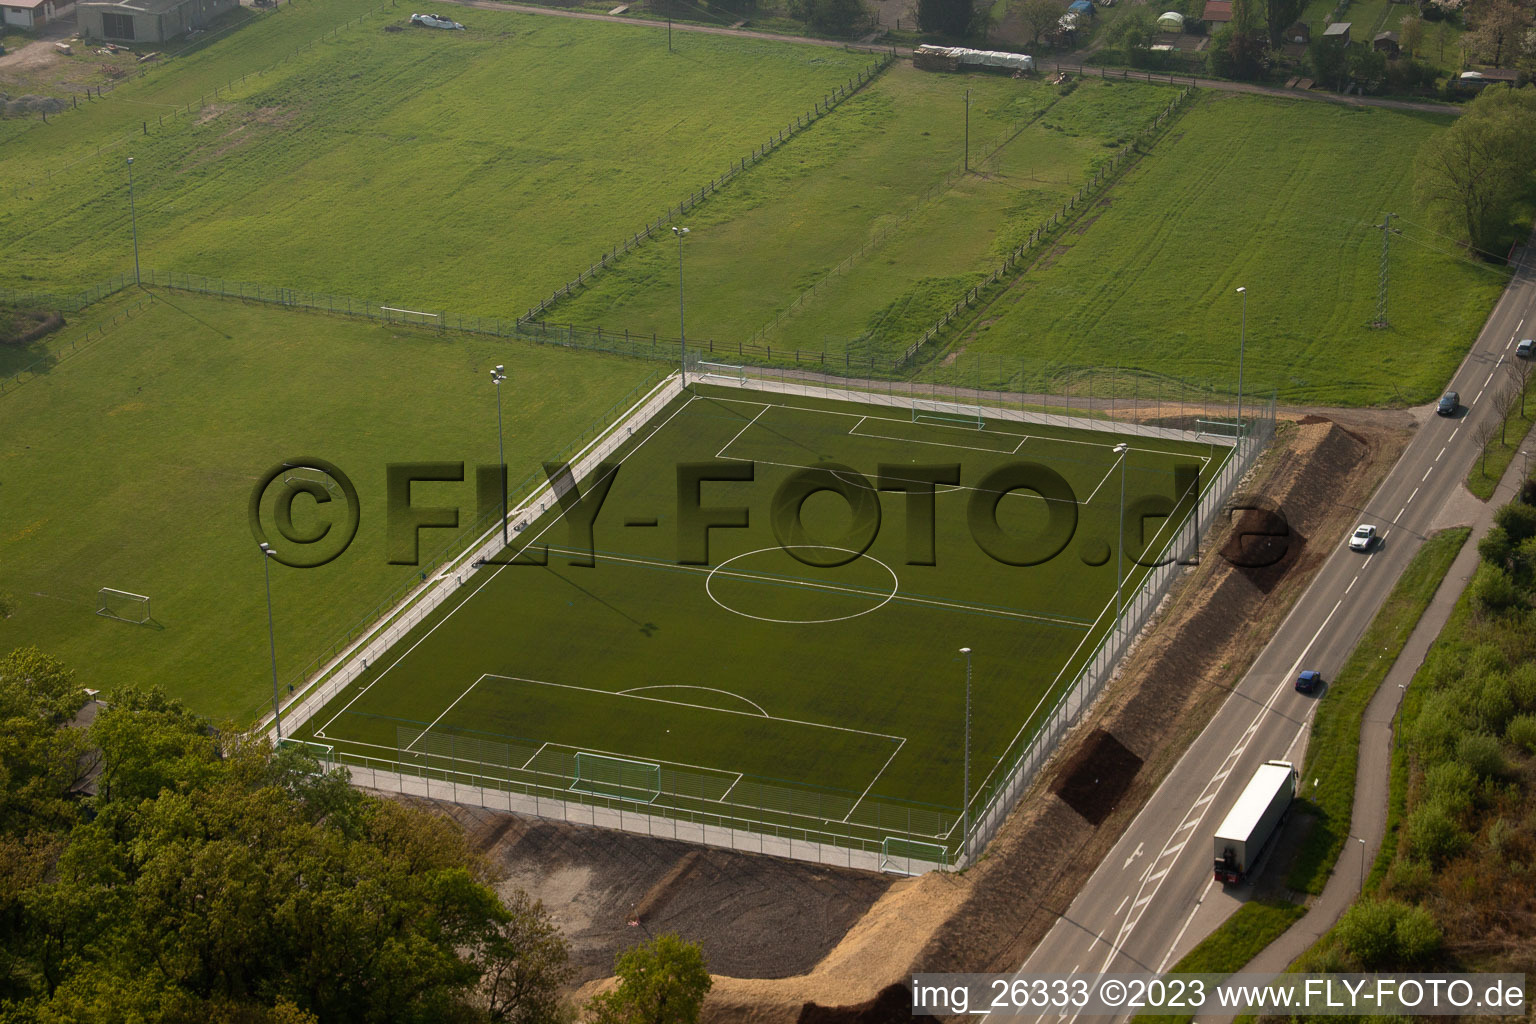 New artificial turf pitch in the district Minderslachen in Kandel in the state Rhineland-Palatinate, Germany